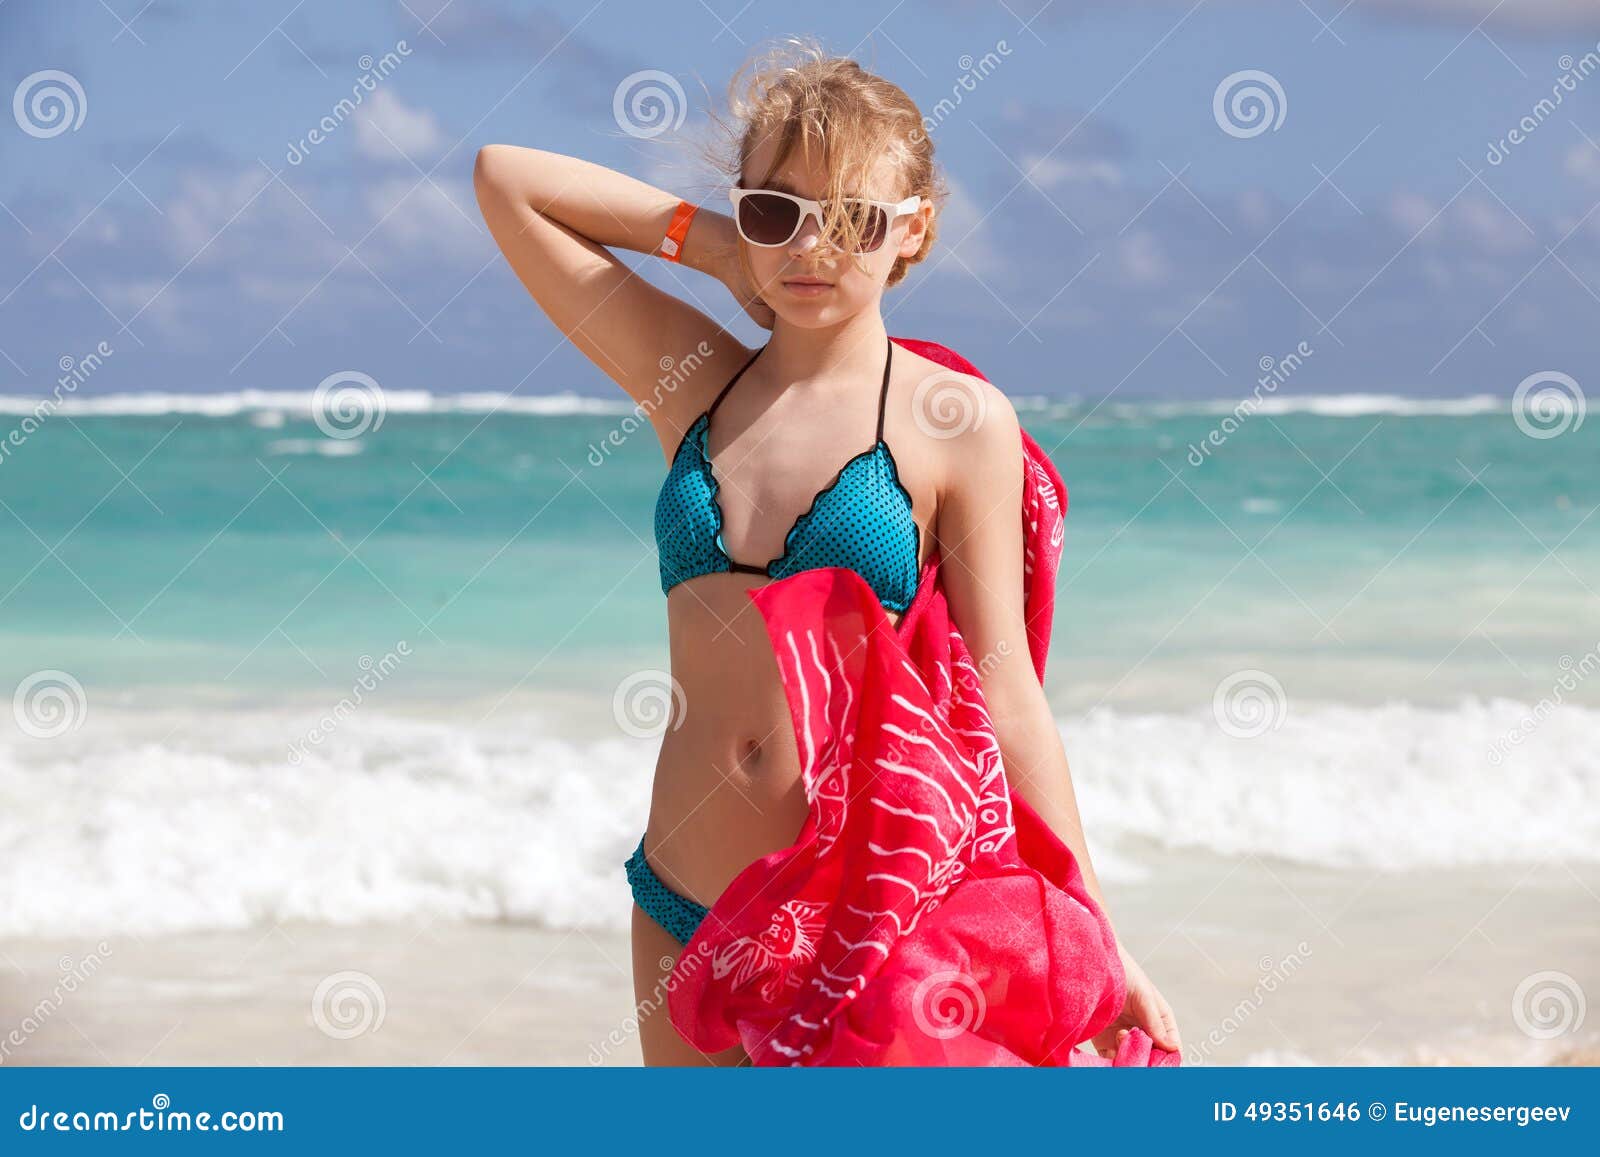 11,938 Beautiful Teenage Girl Swimsuit Royalty-Free Images, Stock Photos &  Pictures